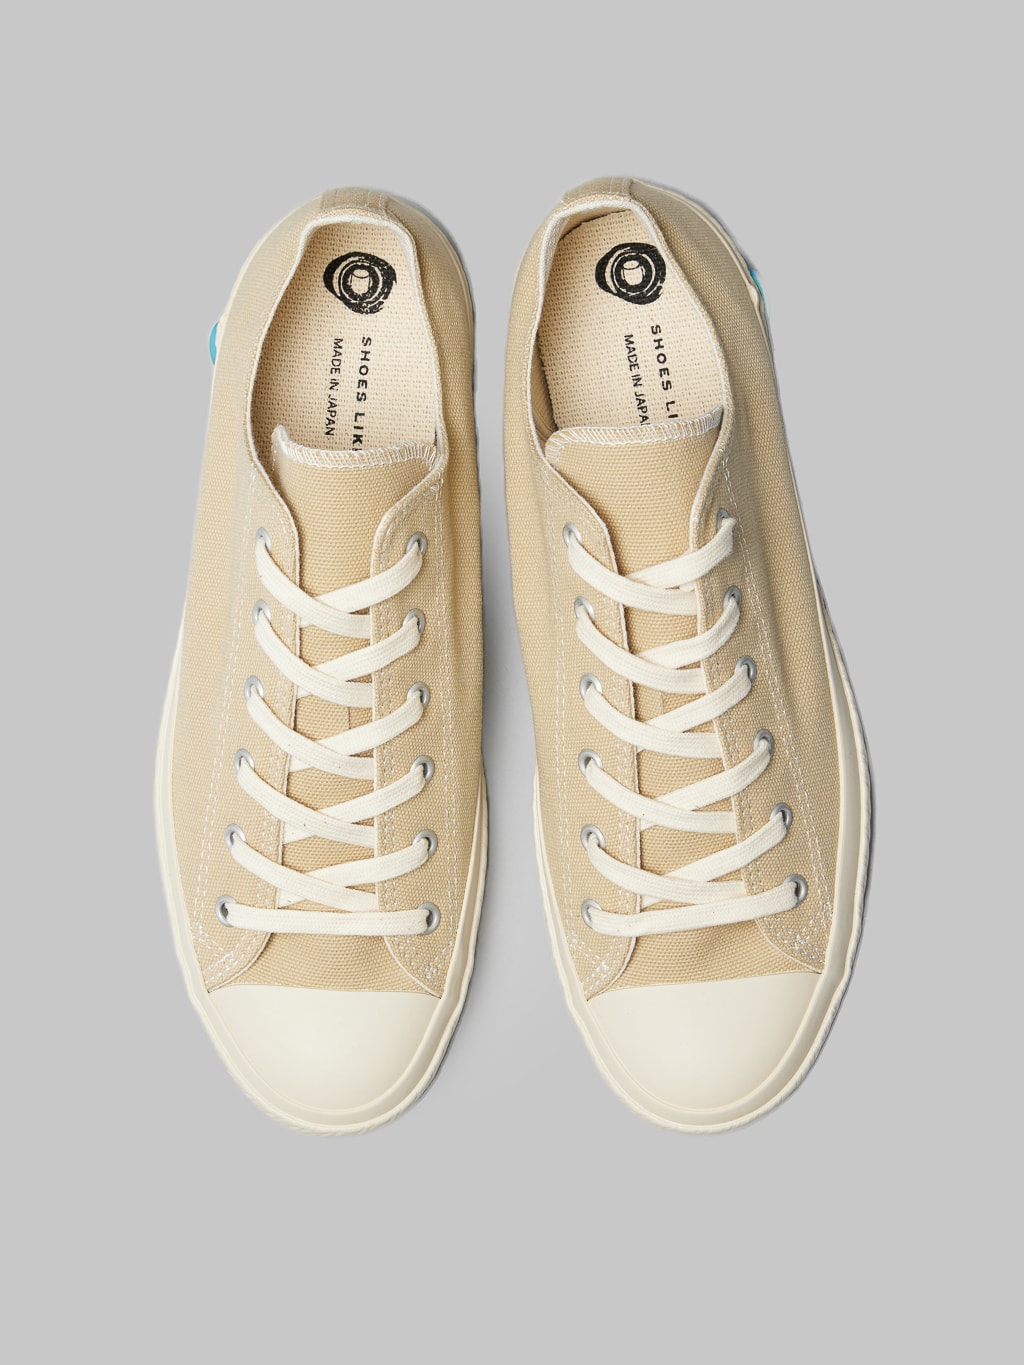 Shoes like pottery low beige sneakers up view